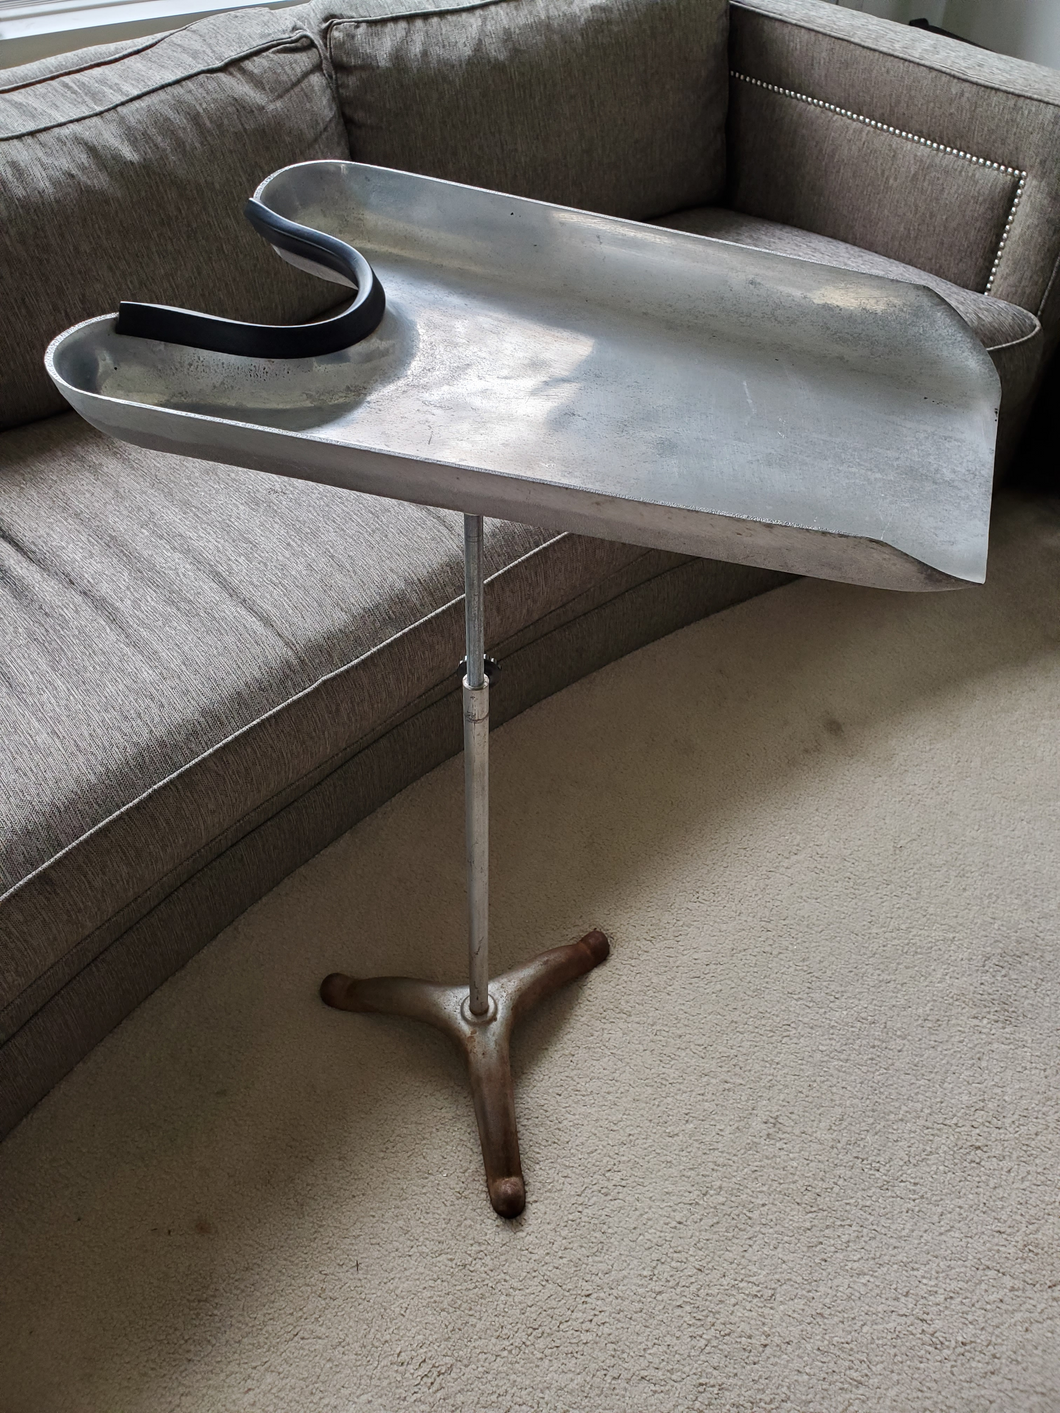 Vintage Barber Shop Chair Hair Wash Shampoo Basin Aluminum Tray with Stand